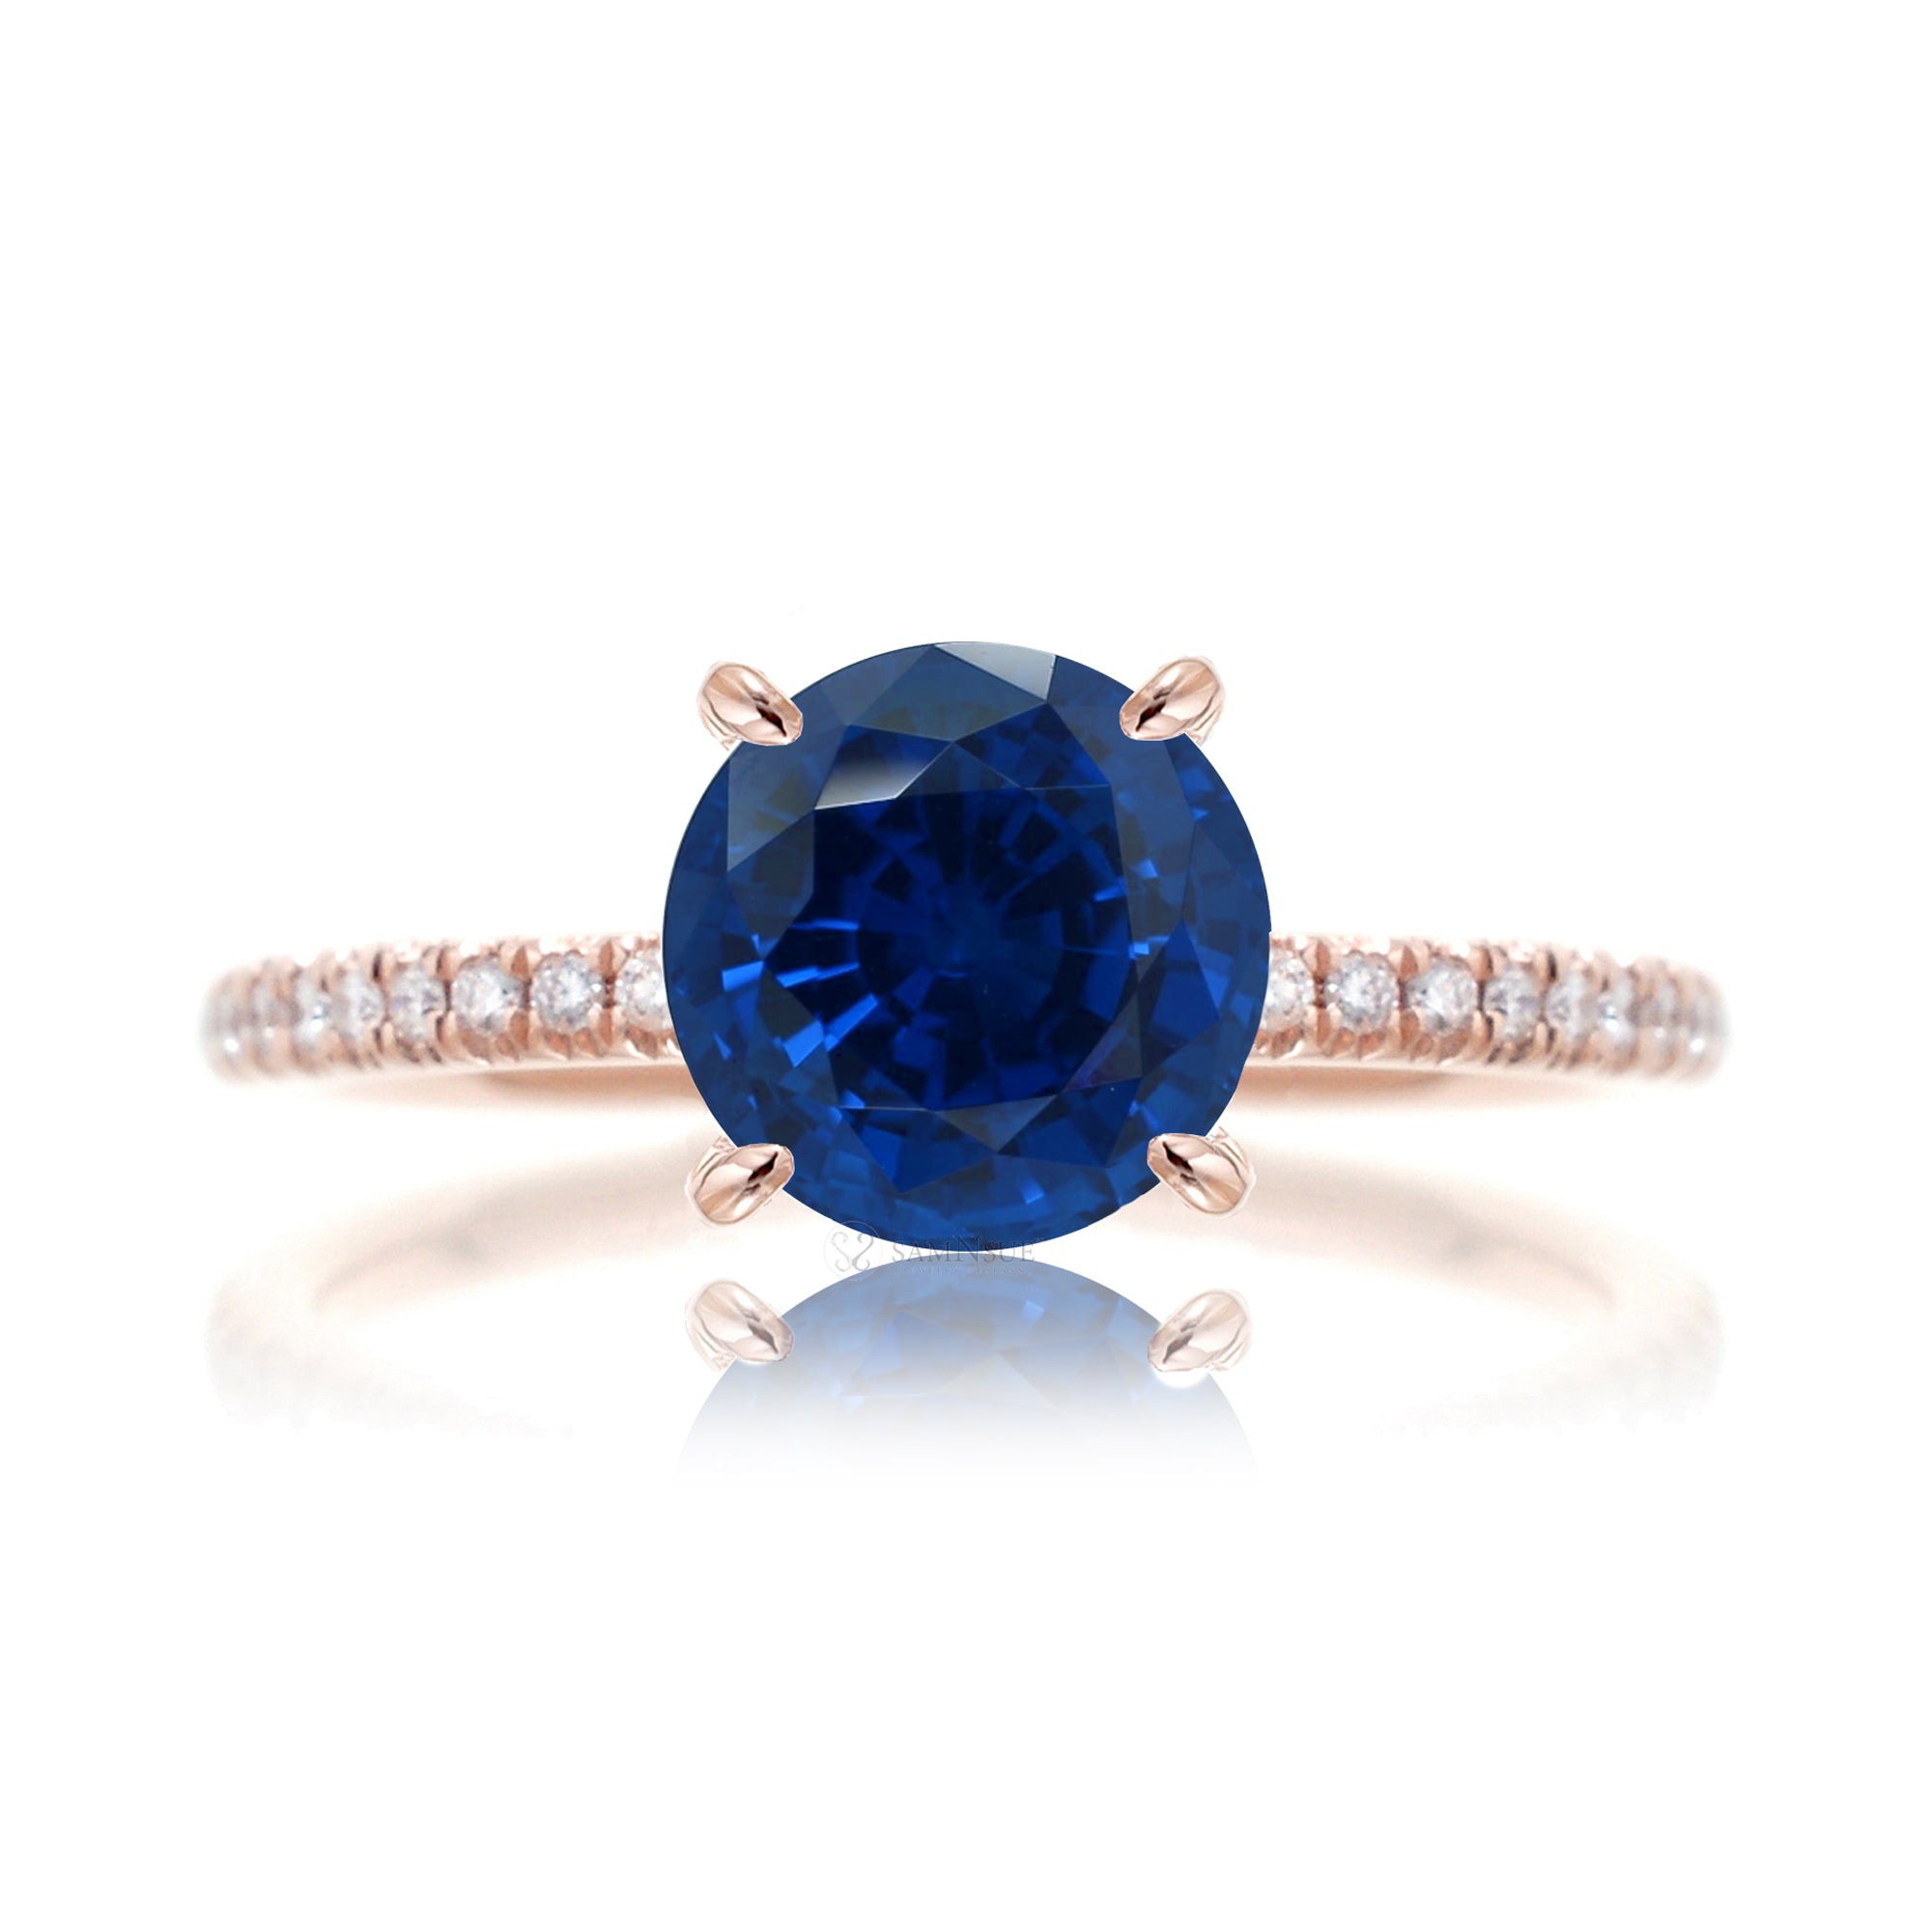 Round blue sapphire diamond band engagement ring rose gold - the Ava